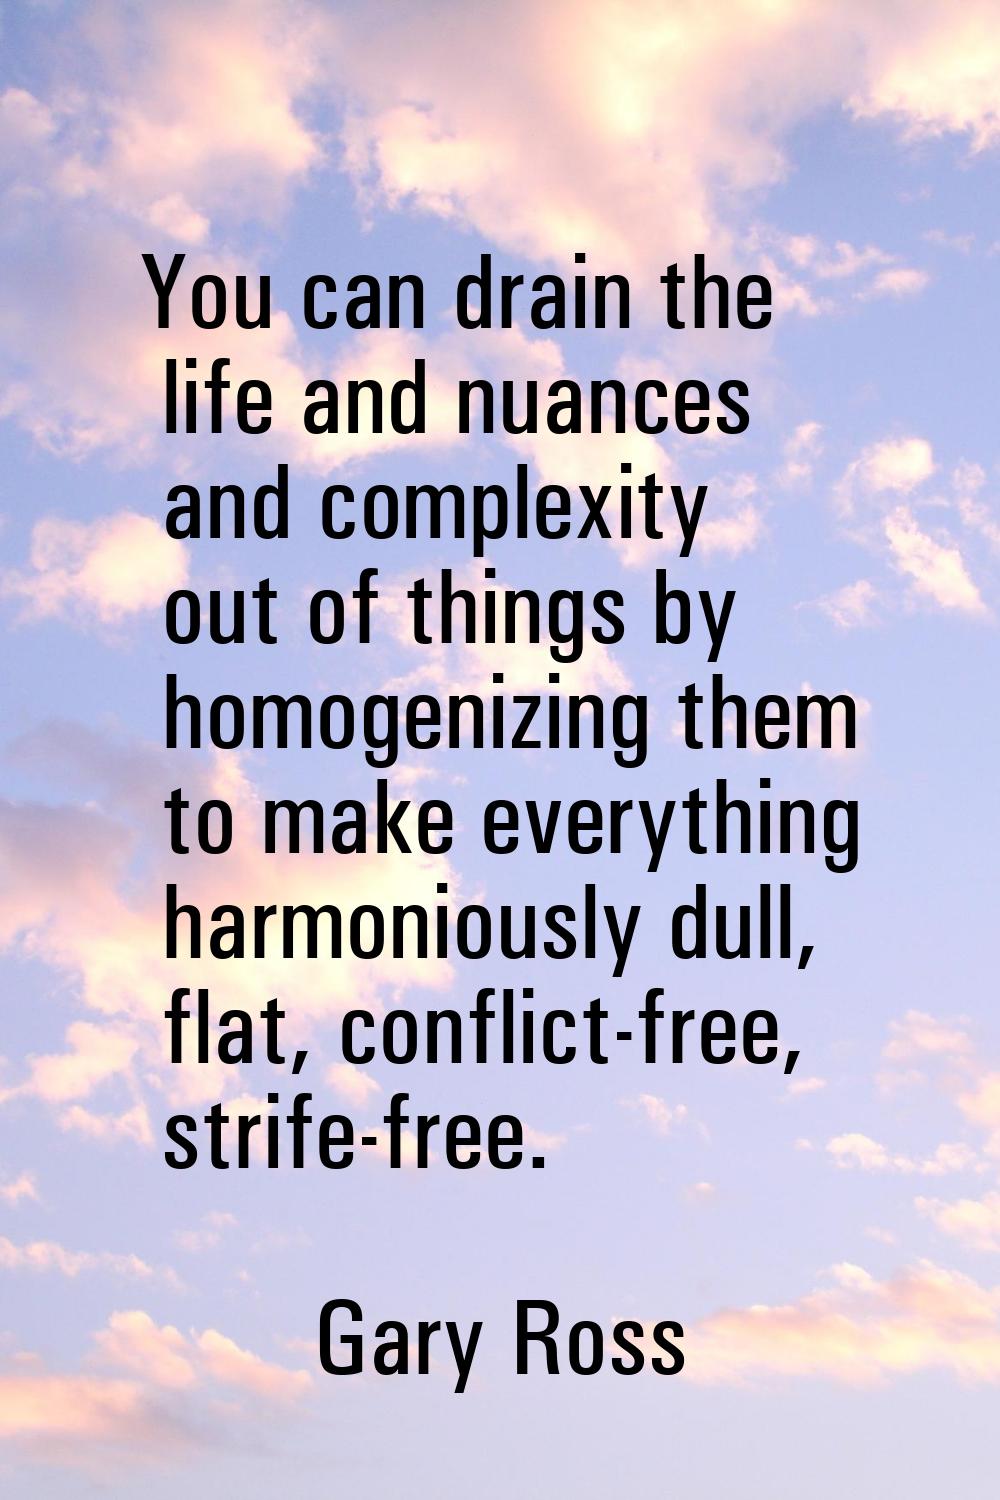 You can drain the life and nuances and complexity out of things by homogenizing them to make everyt